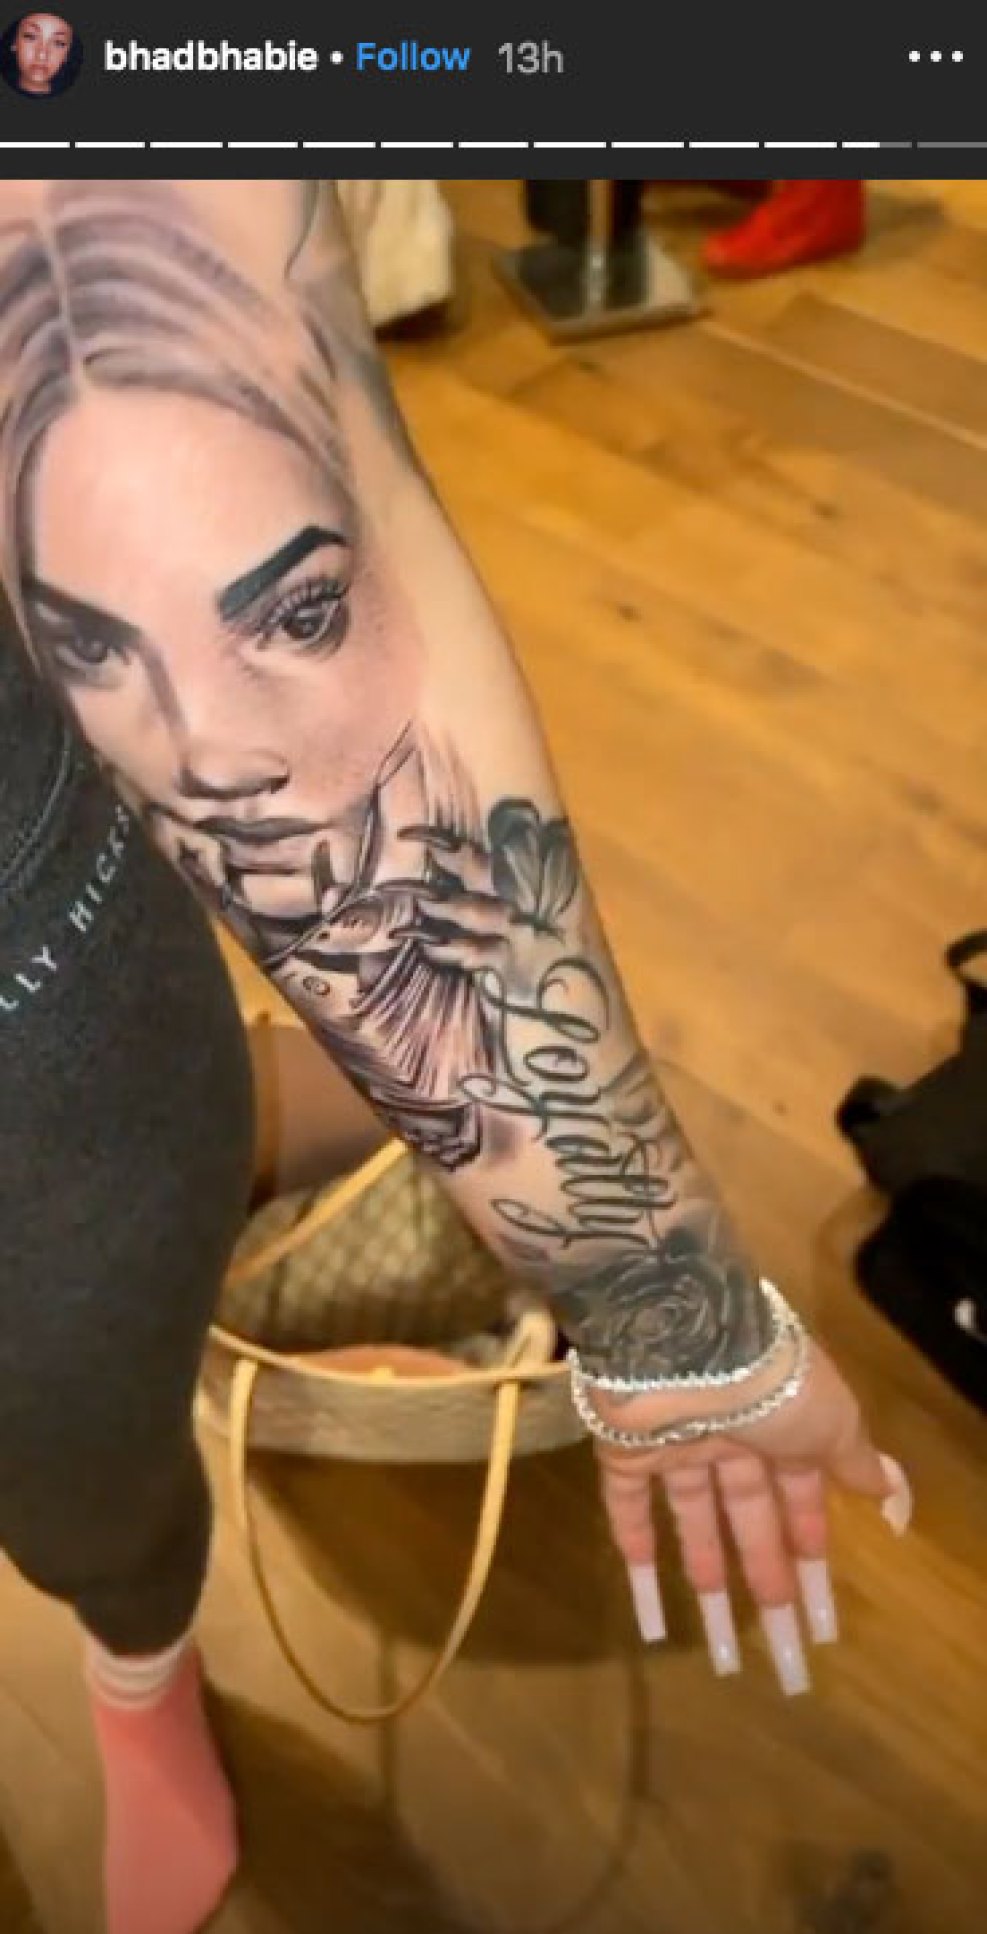 Danielle 'Bhad Bhabie' Bregoli Gets A Giant Tattoo Of Her Own Face On Her Leg